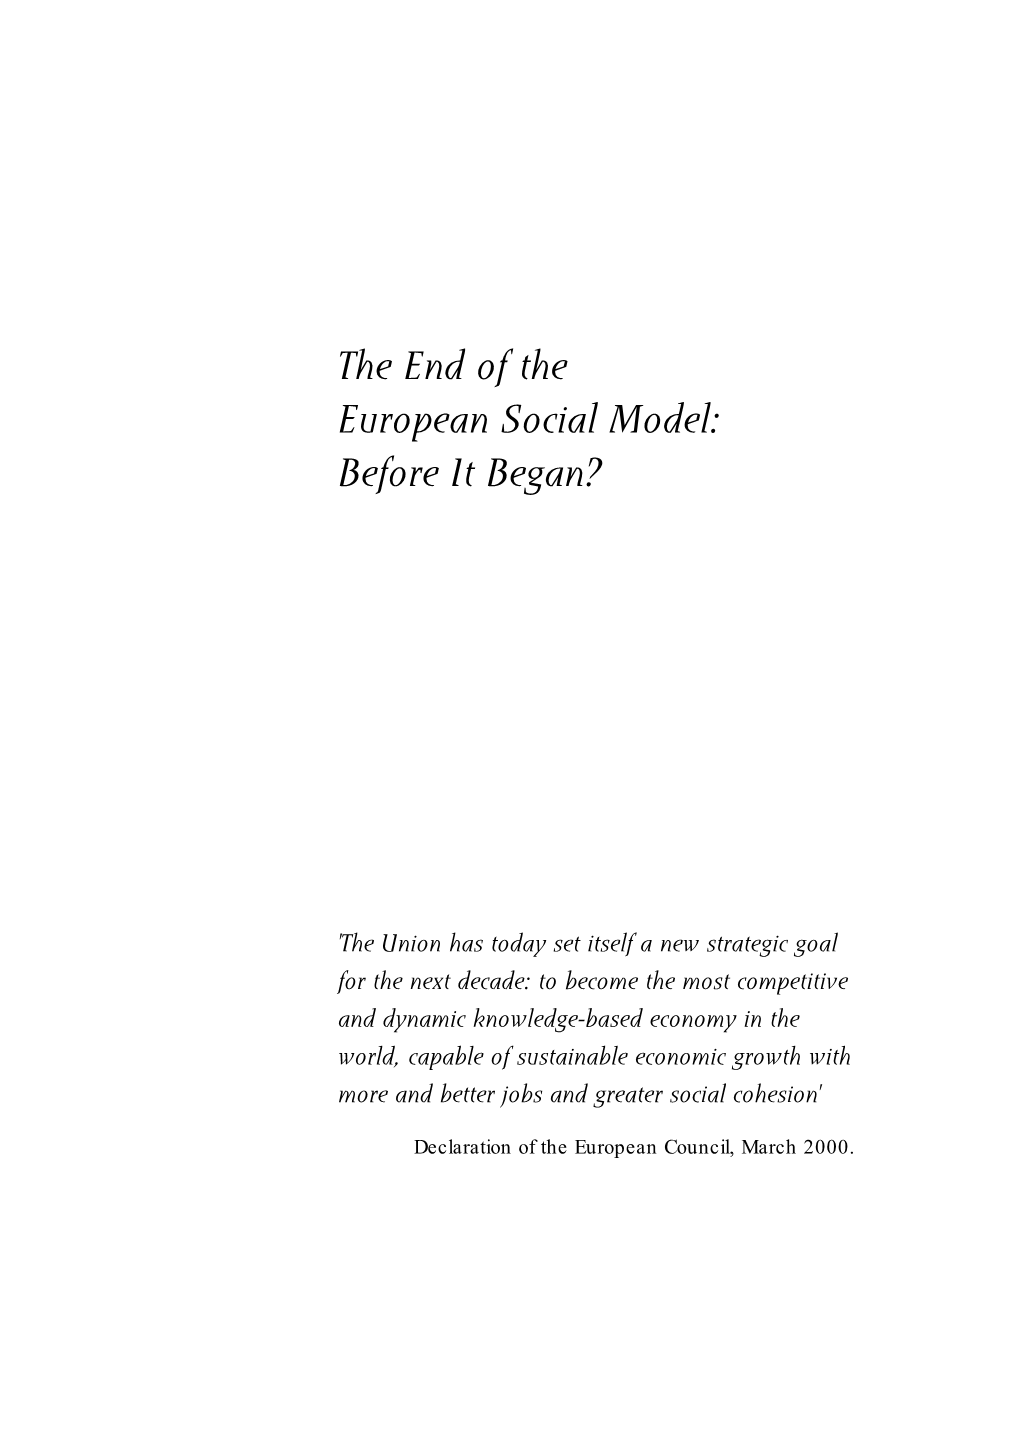 The End of the European Social Model: Before It Began?